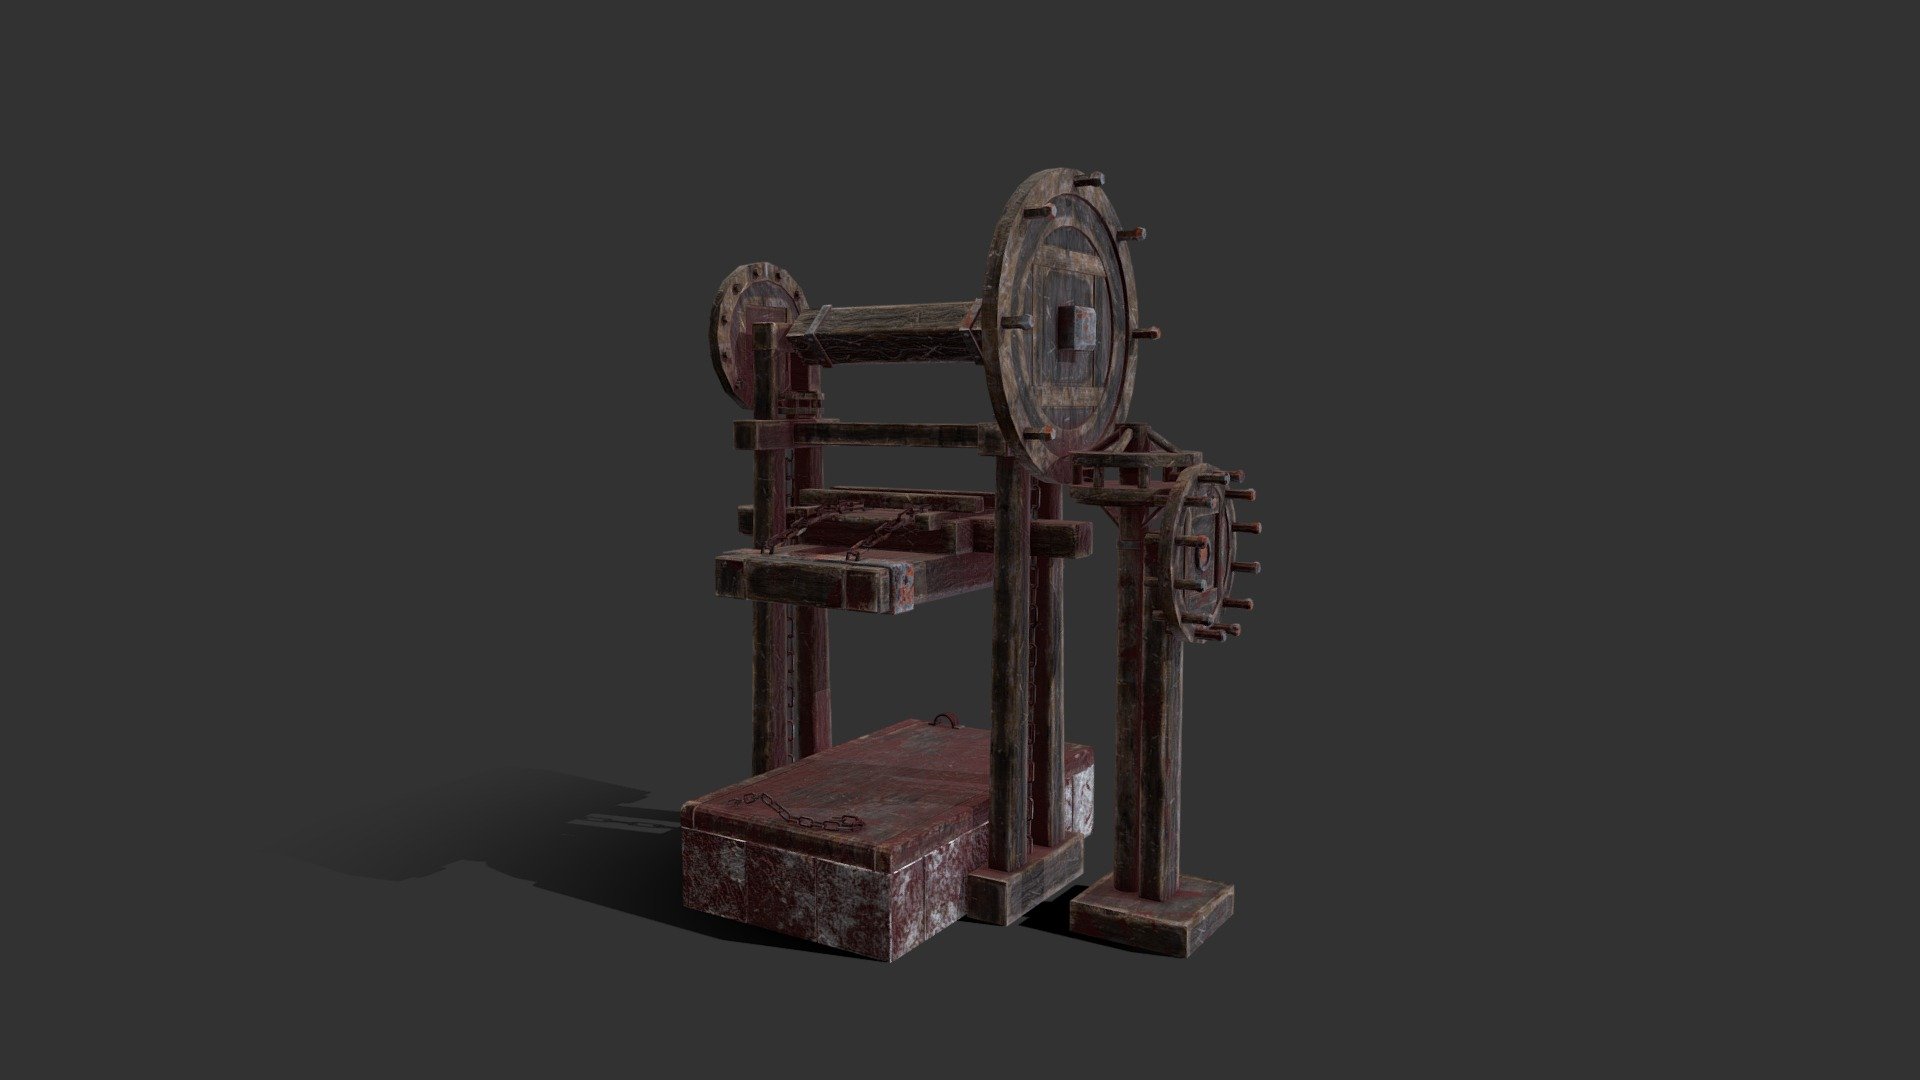 Model made in a Blender and textured with Substance Painter 3d model